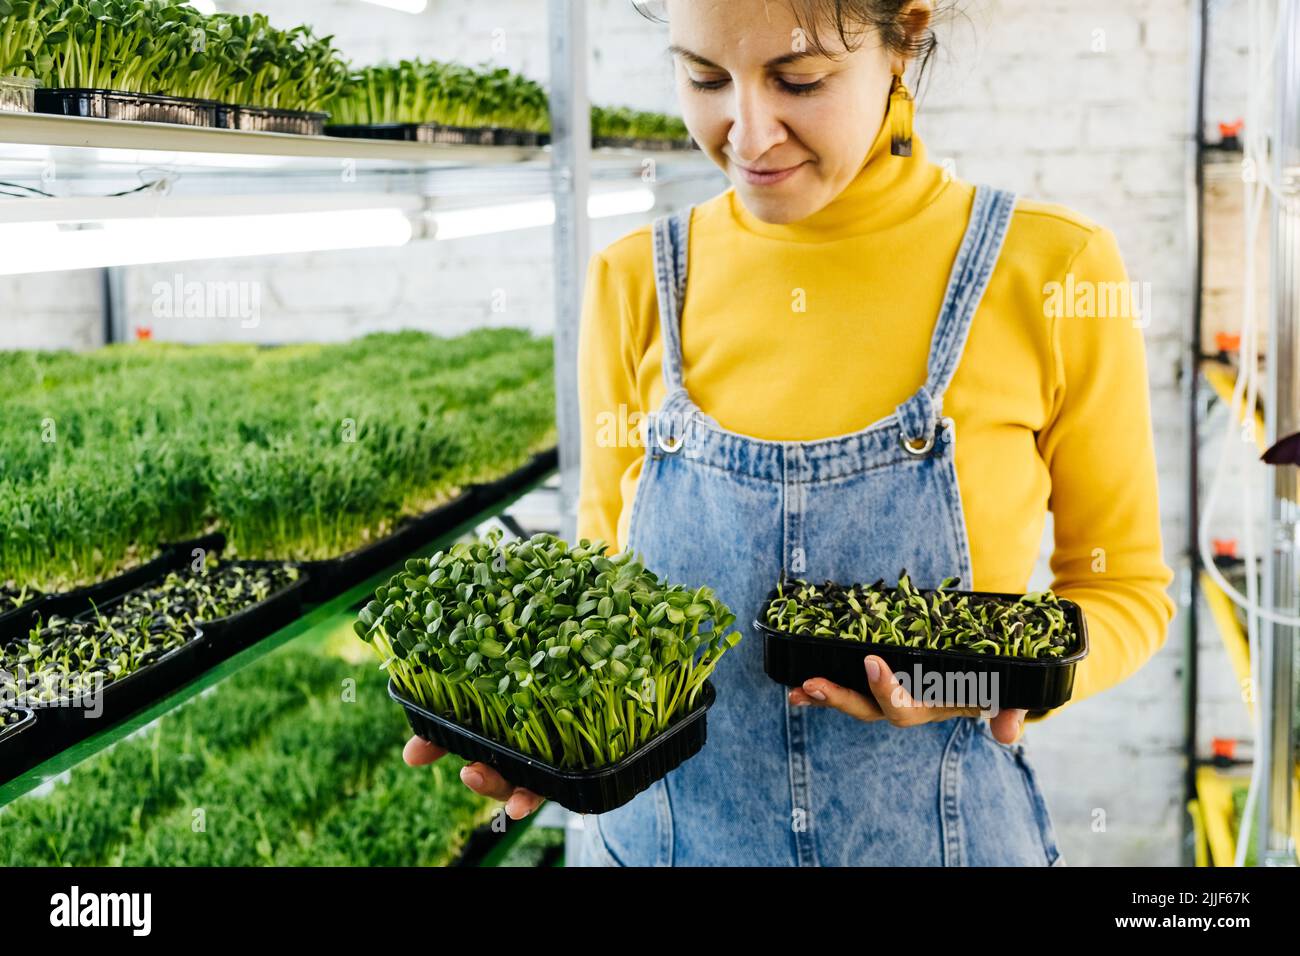 Microgreens growing background with raw sprouts in female hands. Fresh raw herbs from home garden or indoor vertical farm, full of vitamins for vegans Stock Photo